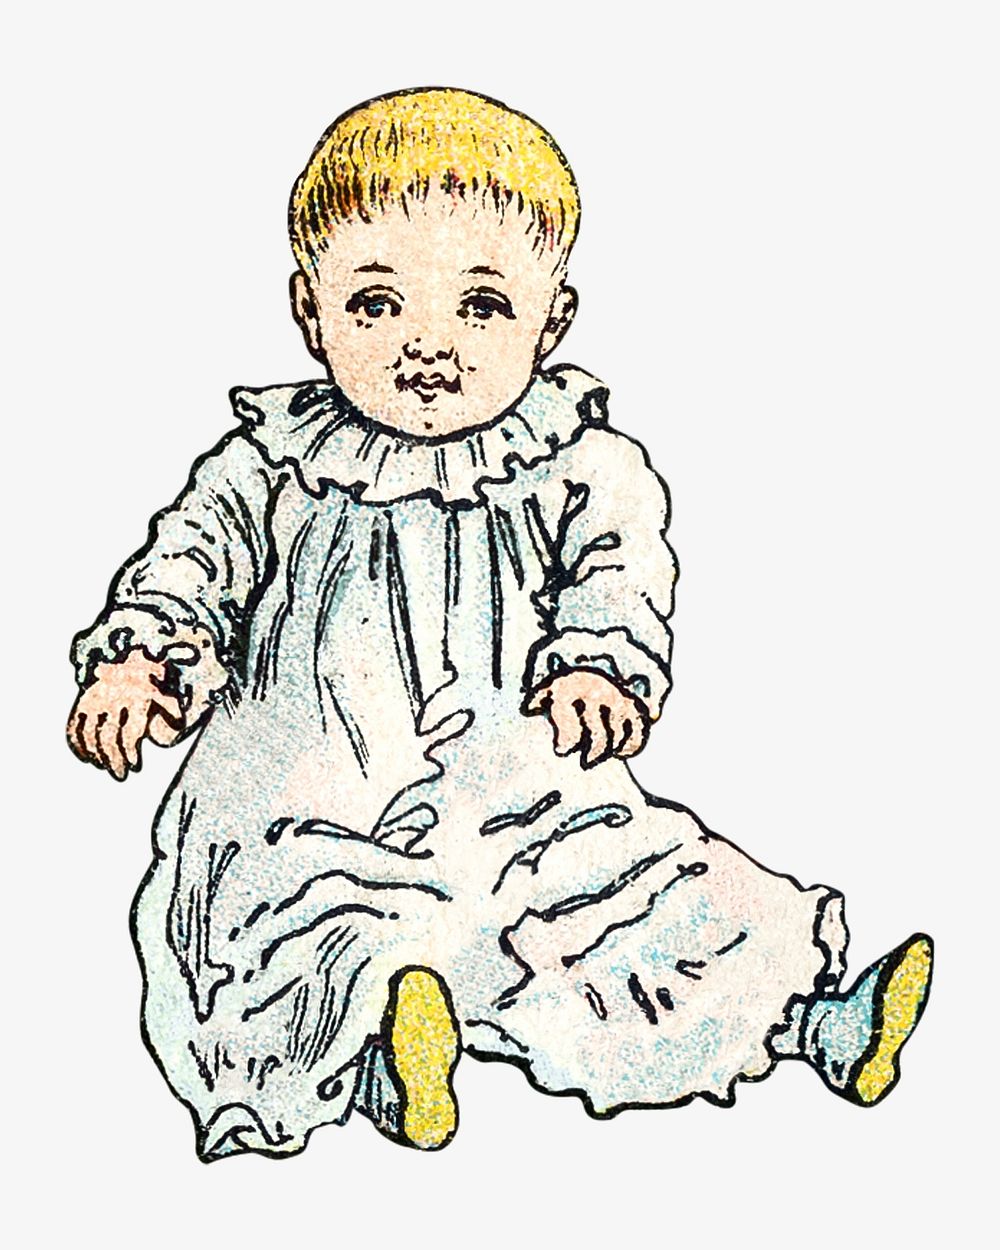 Vintage toddler child illustration by Shober & Carqueville Lith. Co. Remixed by rawpixel.